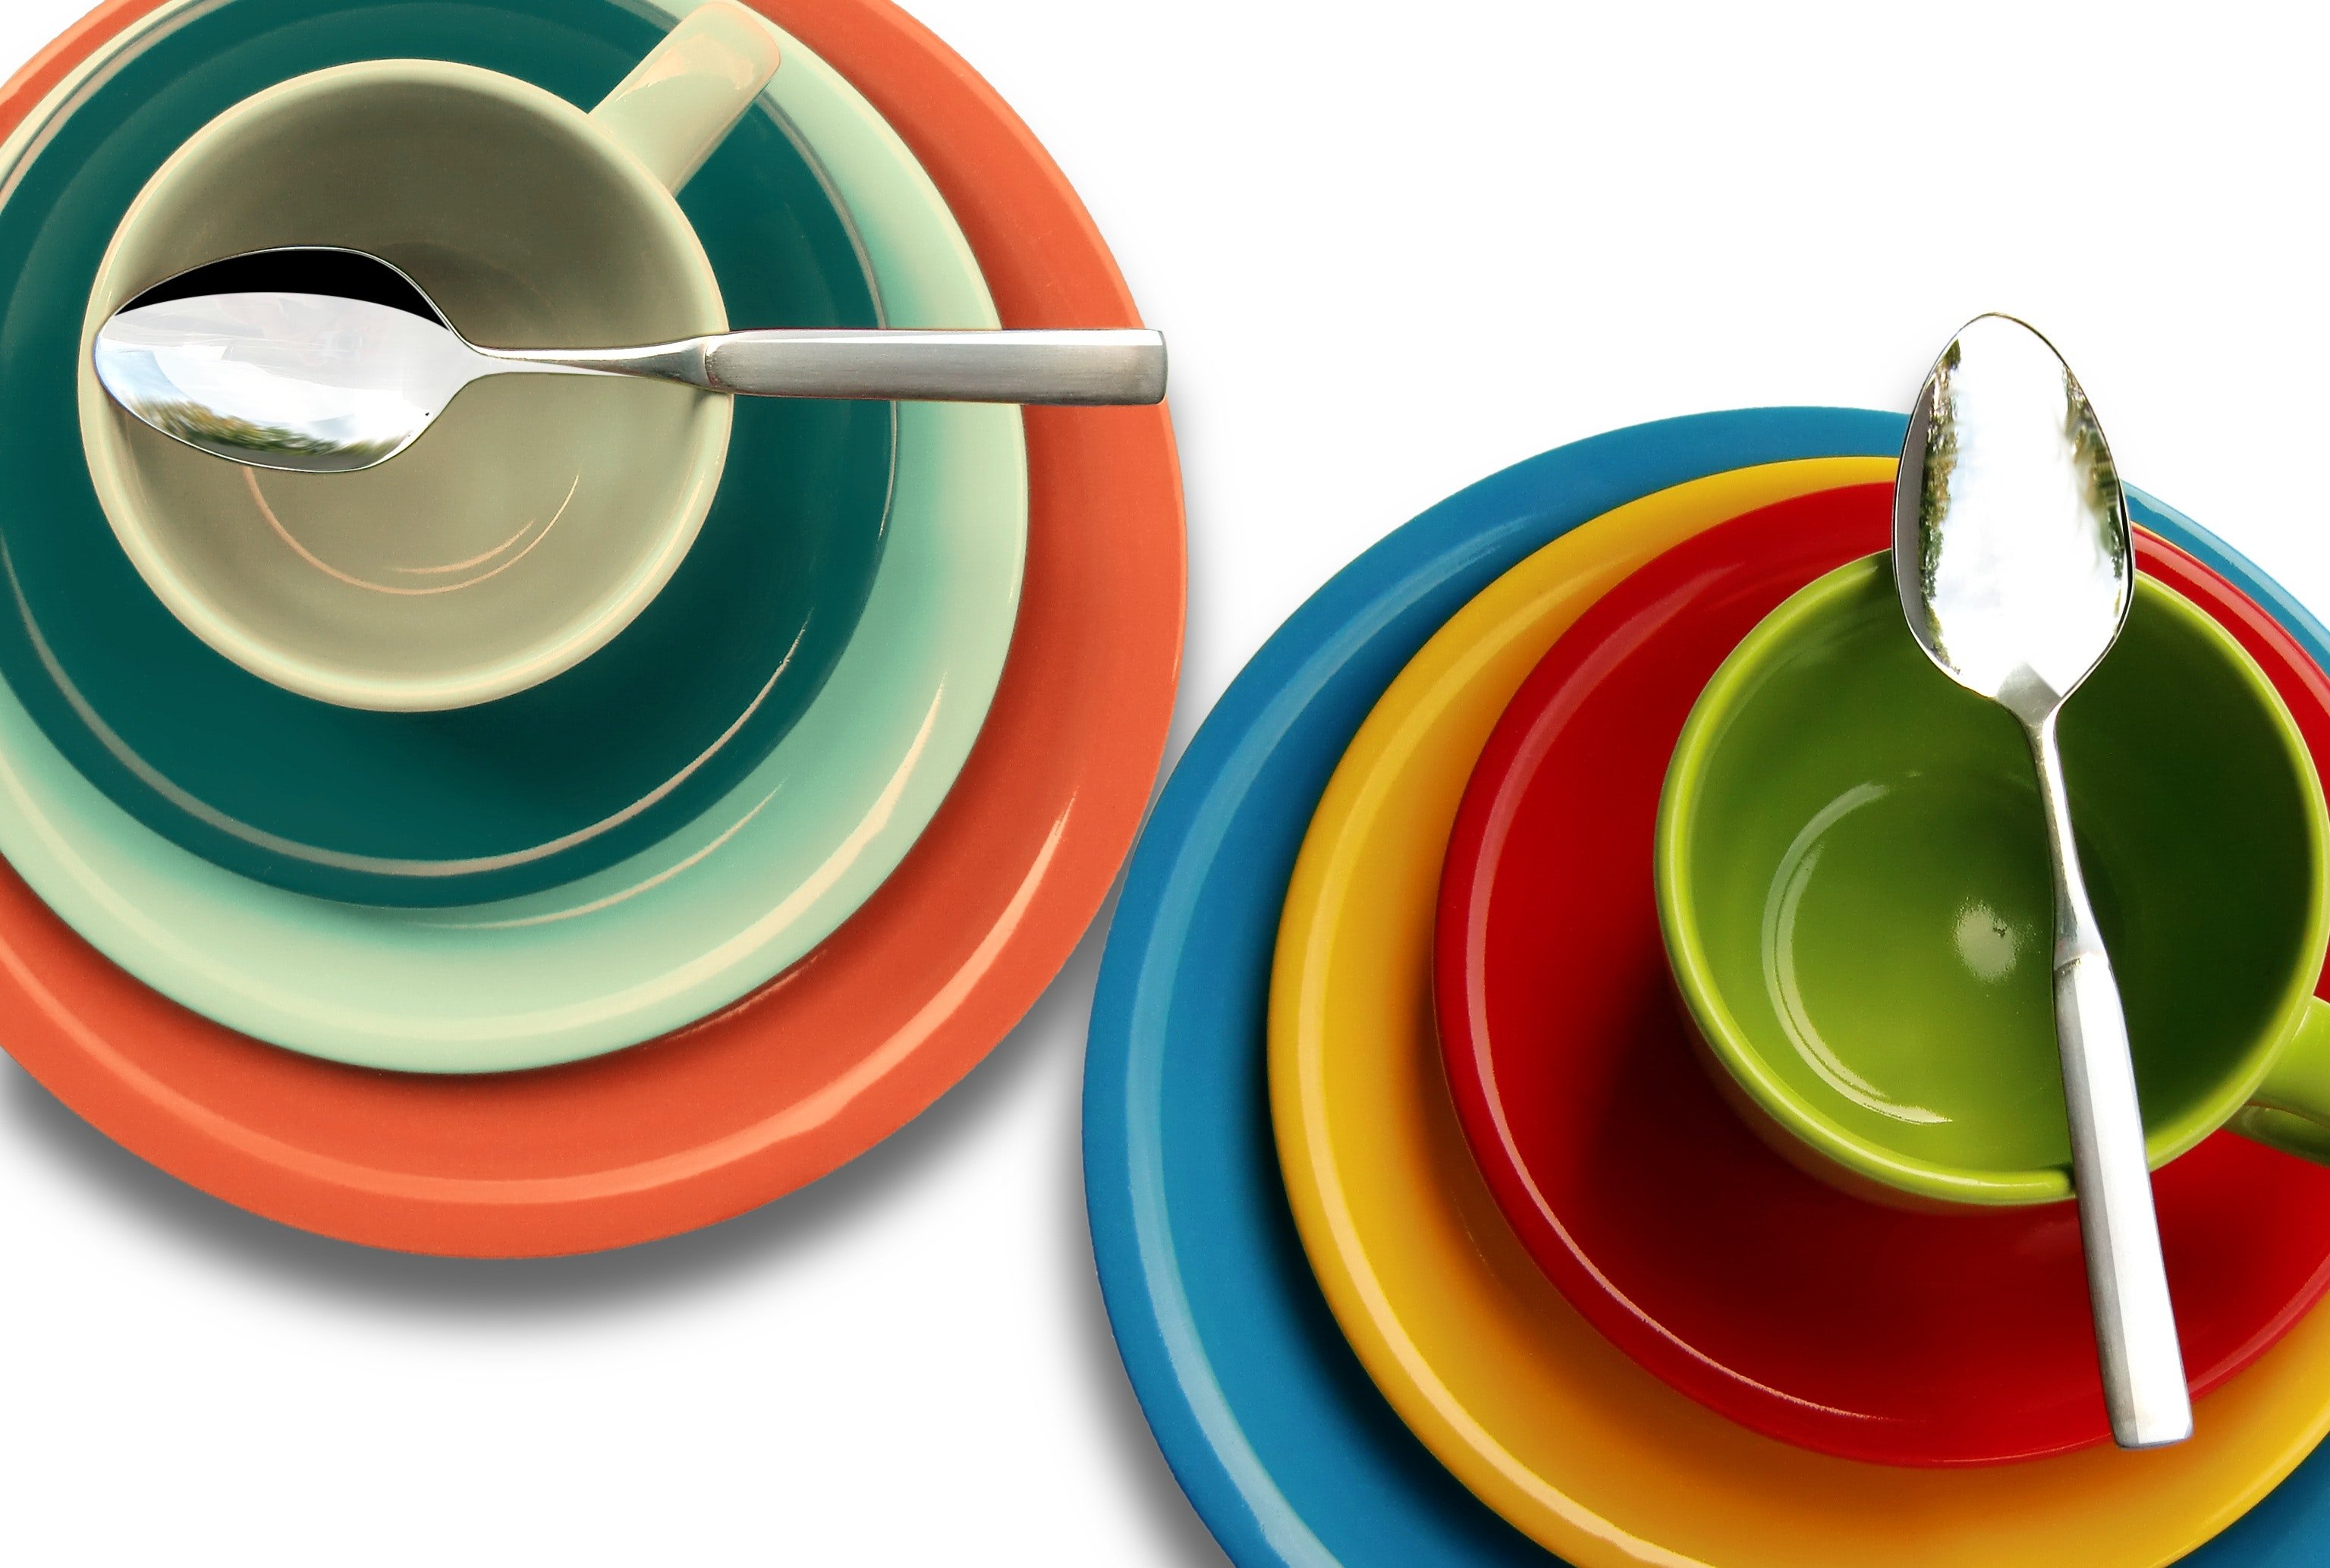 Pictured - A photo of colorful plates and cups | Source: Pexels 